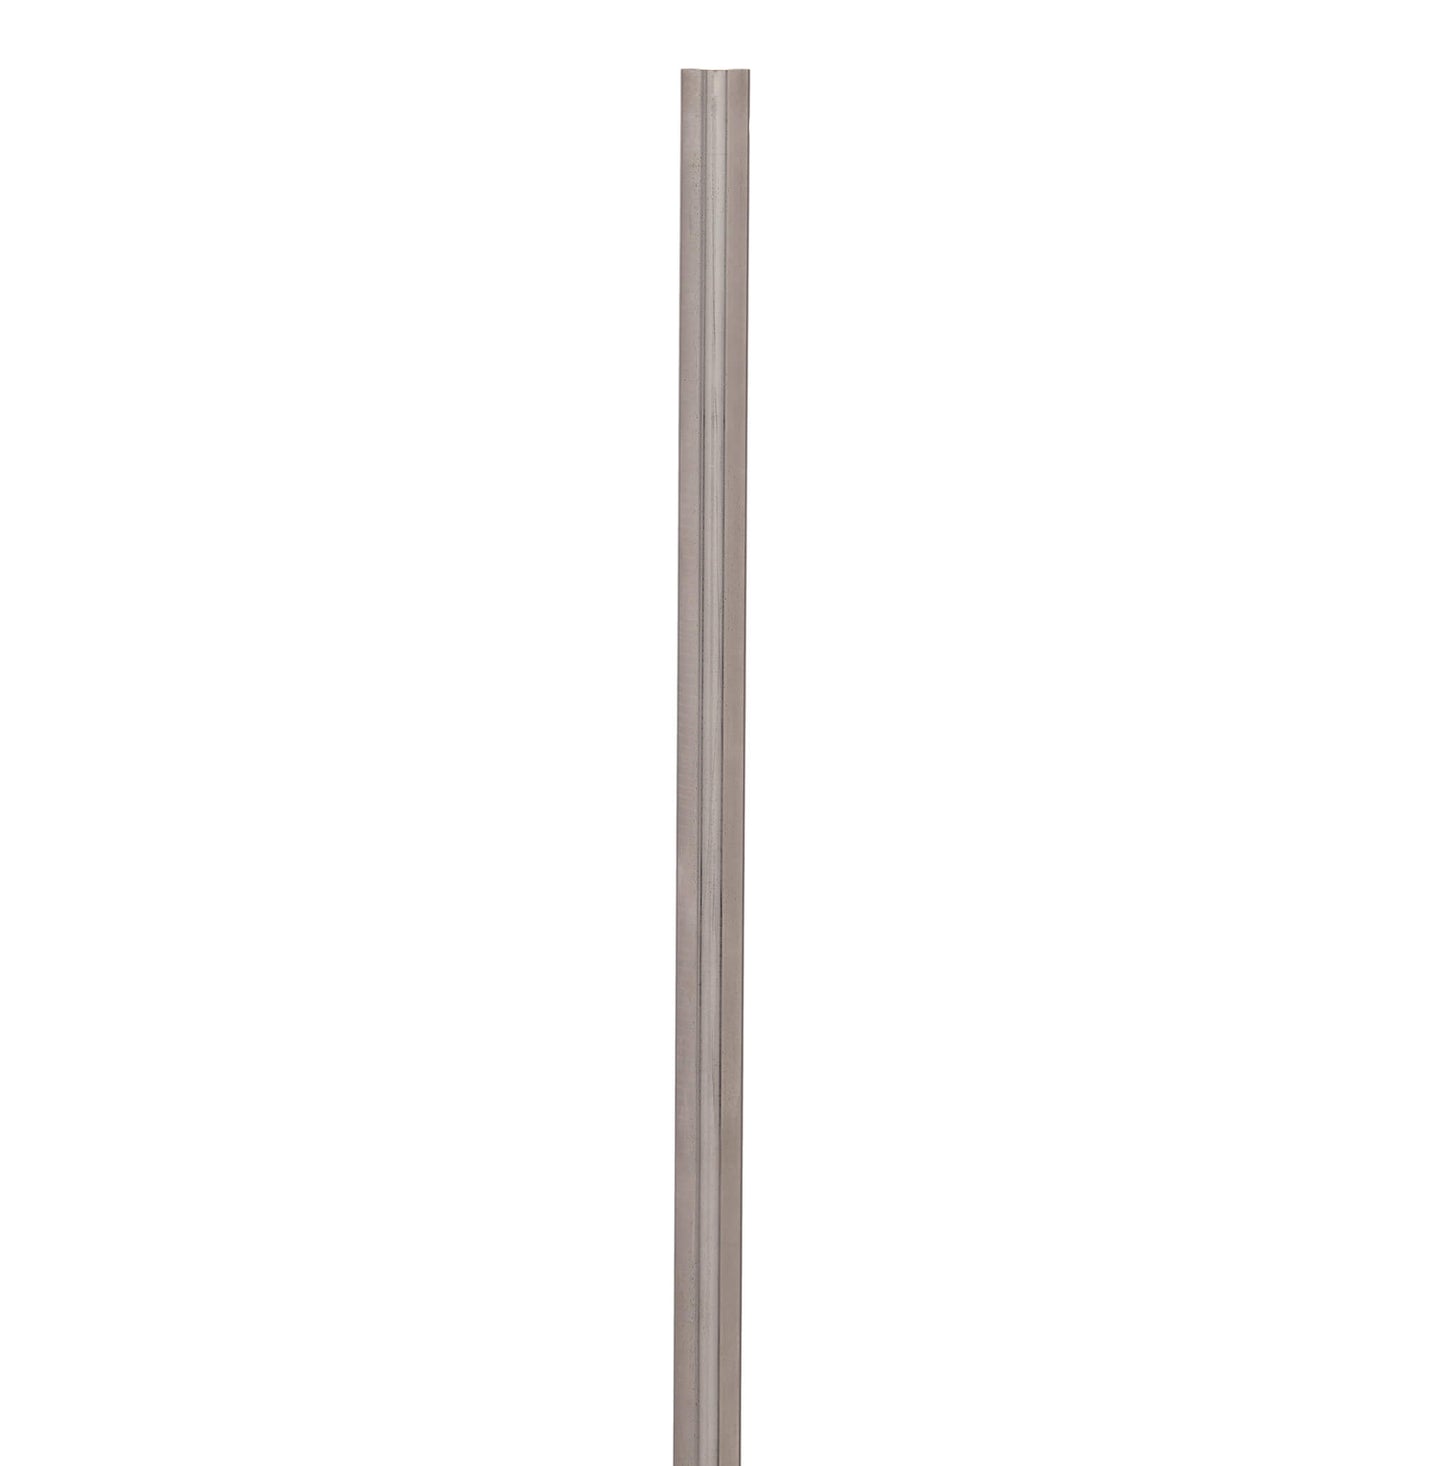 Large Stanchion - Stainless Steel